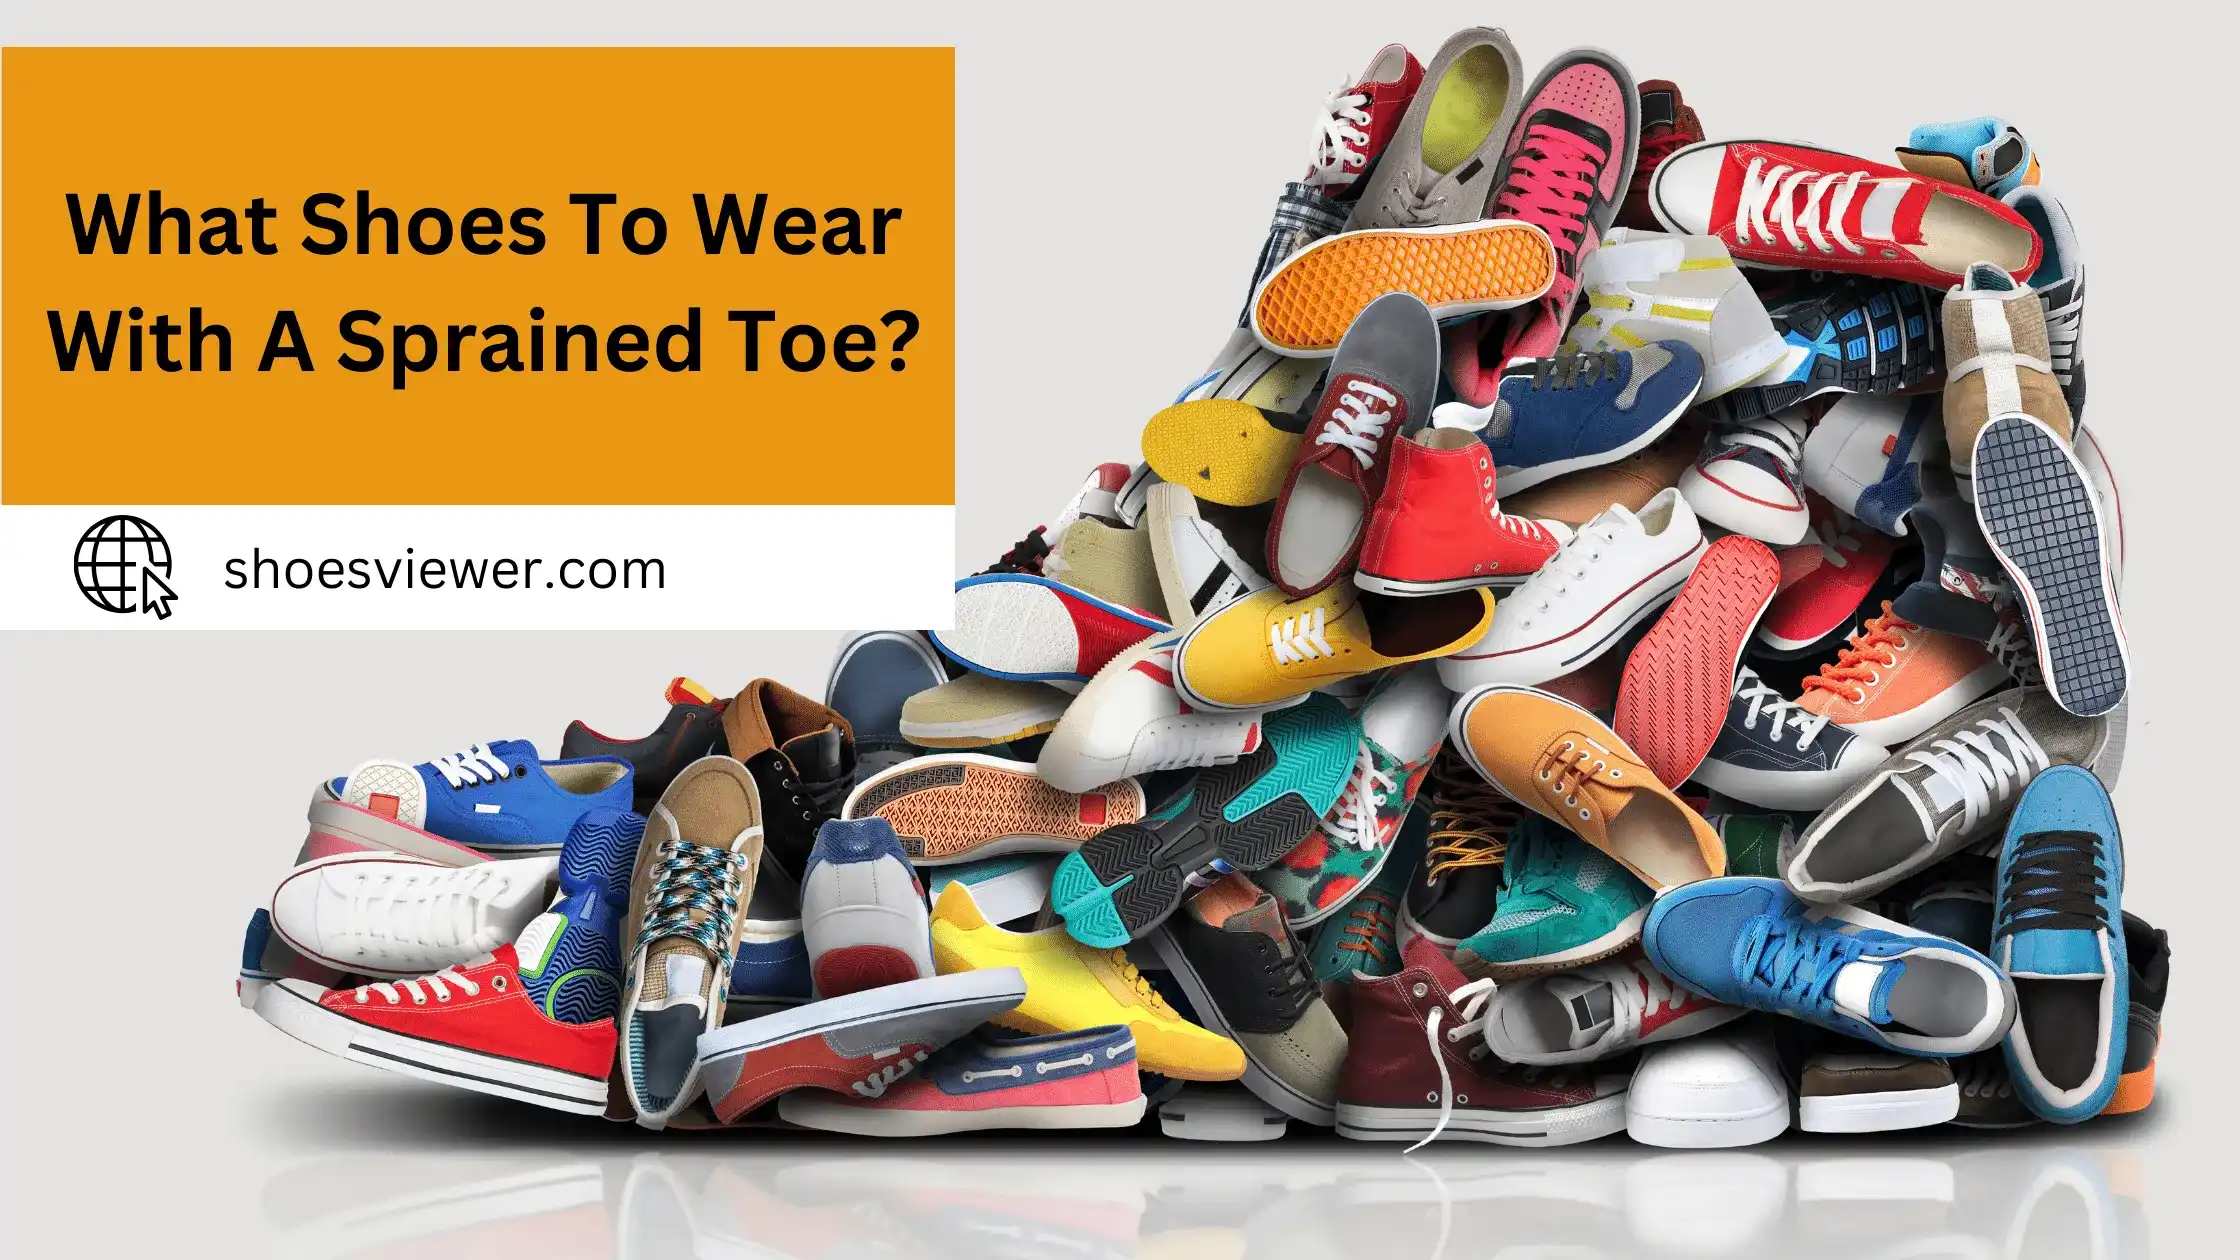 What Shoes To Wear With A Sprained Toe? Latest Guide